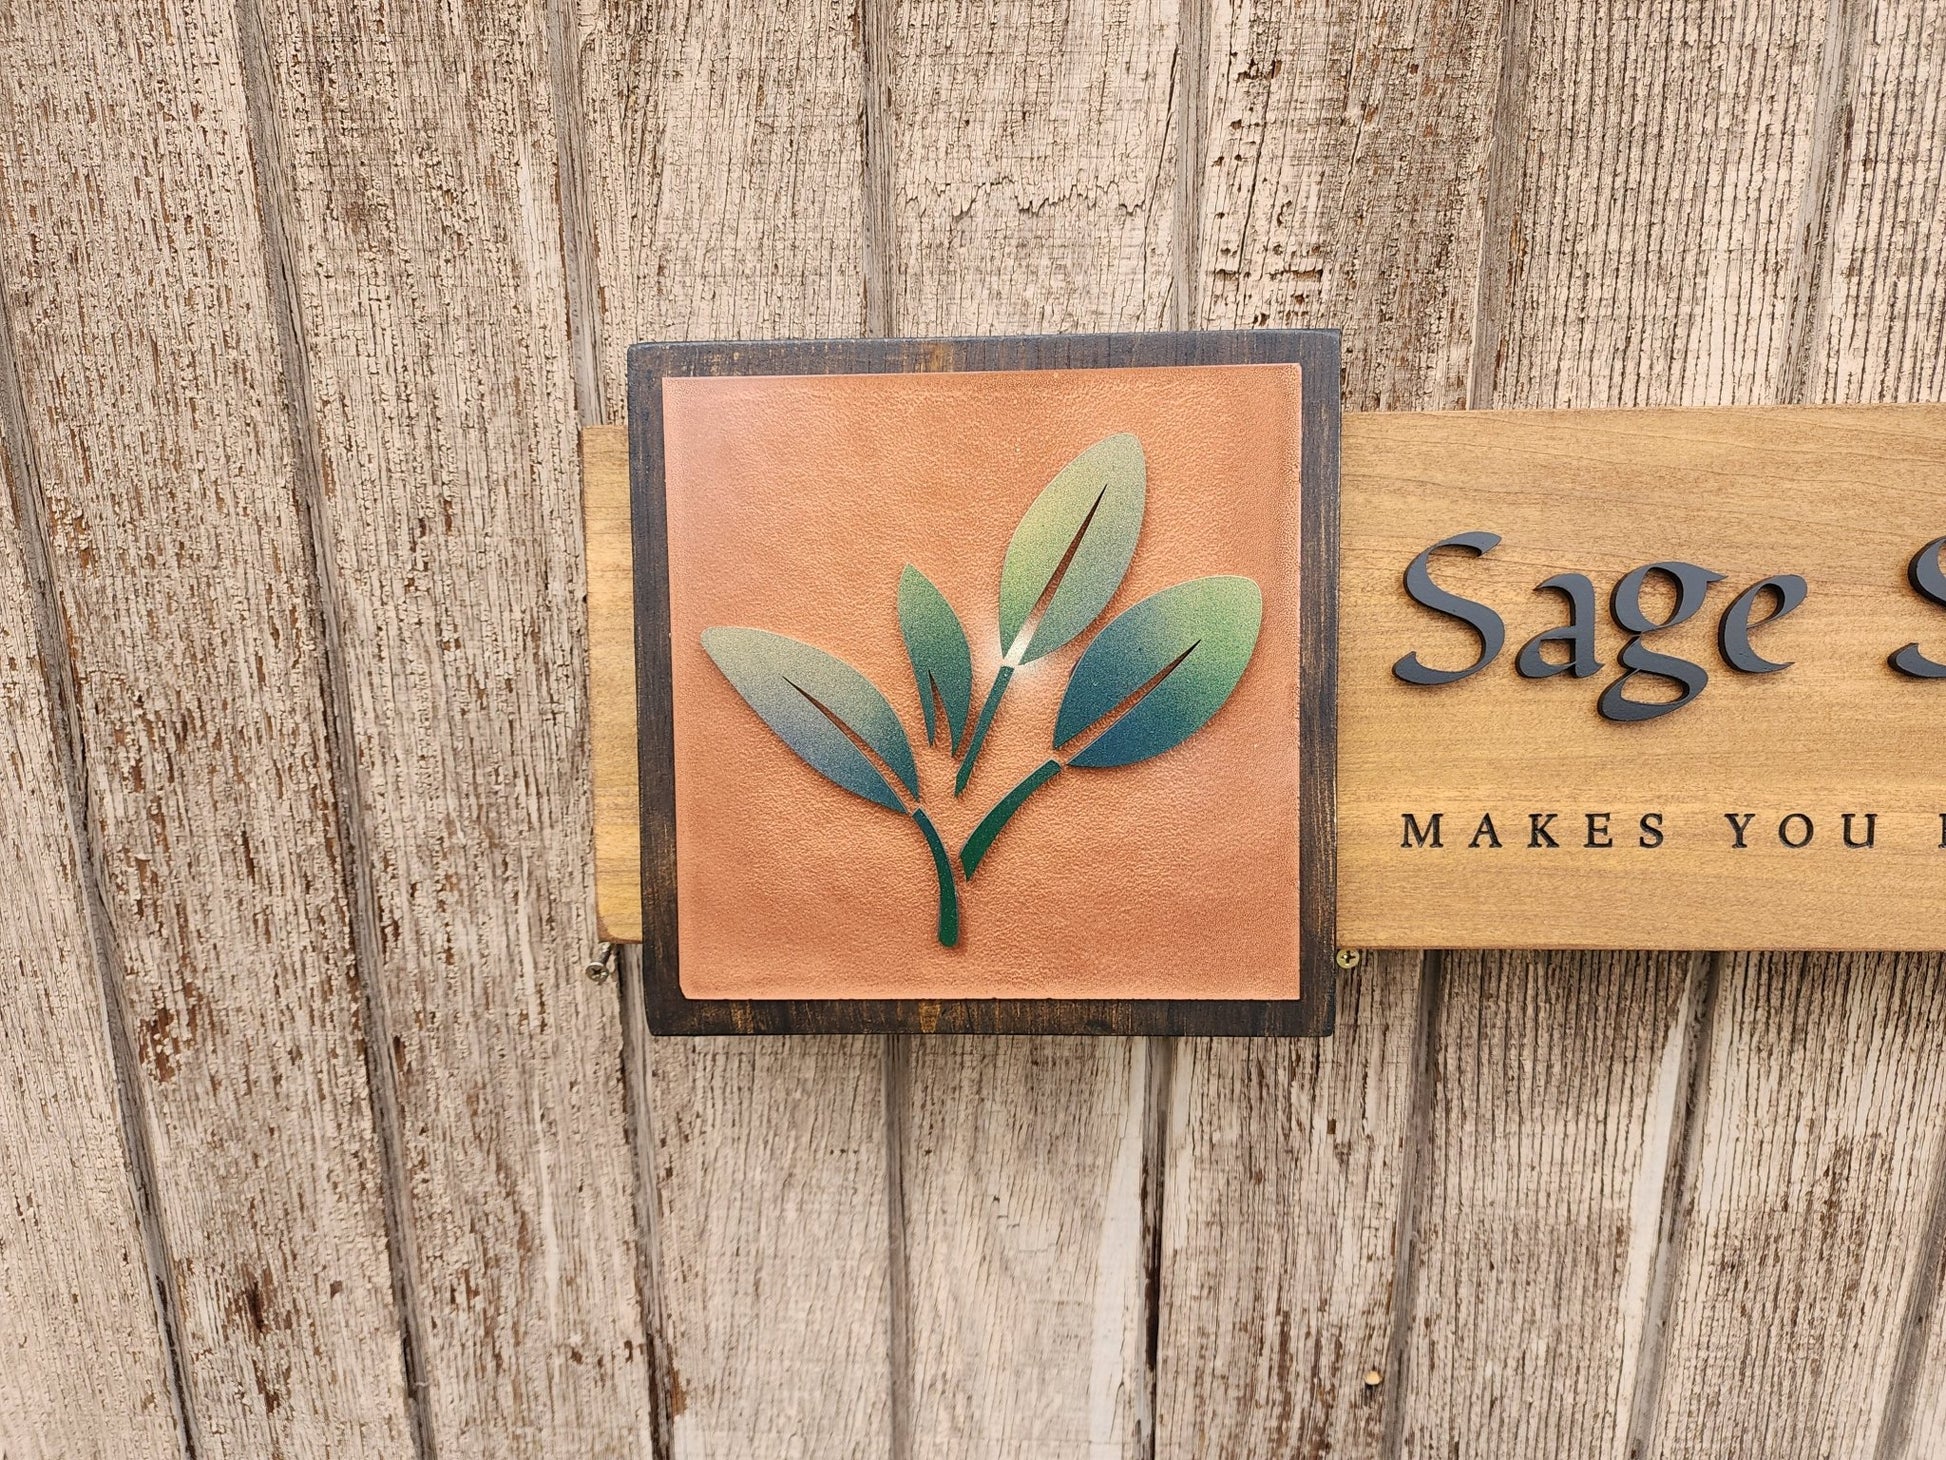 Multi-Layered Wood Business Sign with Raised Logo - Bison Peak DesignsWood sign